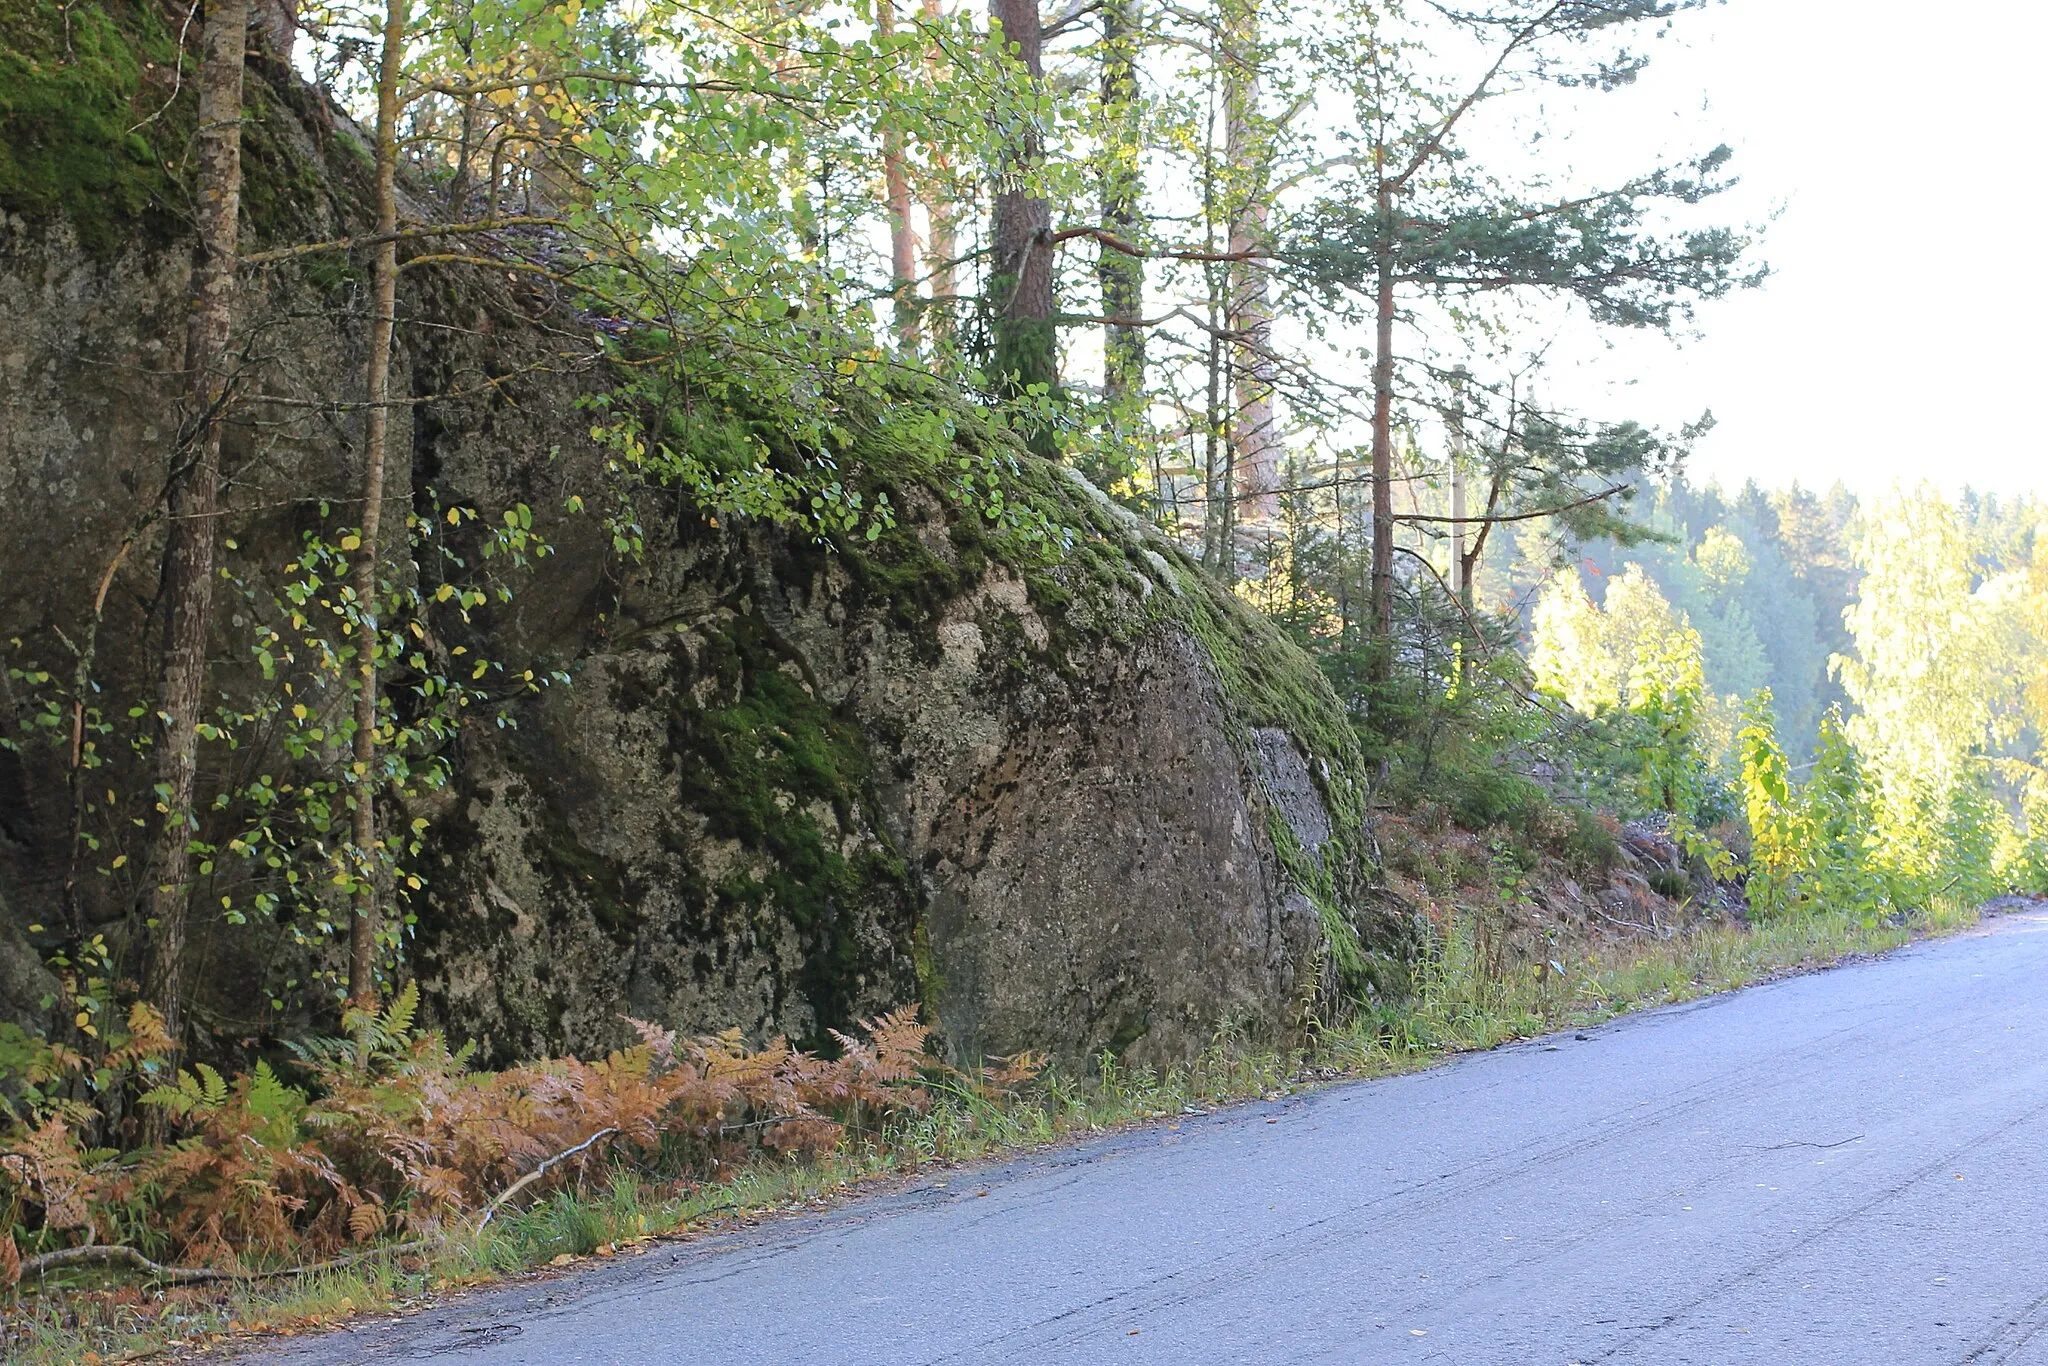 Photo showing: Memorial for building road between Yläne and Riihikoski, Uusikartano village, Yläne, Pöytyä, Finland. - Memorial is a carving on rock by the road (present connecting road 2043) between Yläne and Riihikoski village in Pöytyä. Road was completed in 1895. The carving is "F. F. B." and year "1895", F. F. B. meaning Frans Fredrik Björni (1850-1930), representative in 1897 Diet of Finland; he had a strong influence in building the road. Date of the carving is not known.